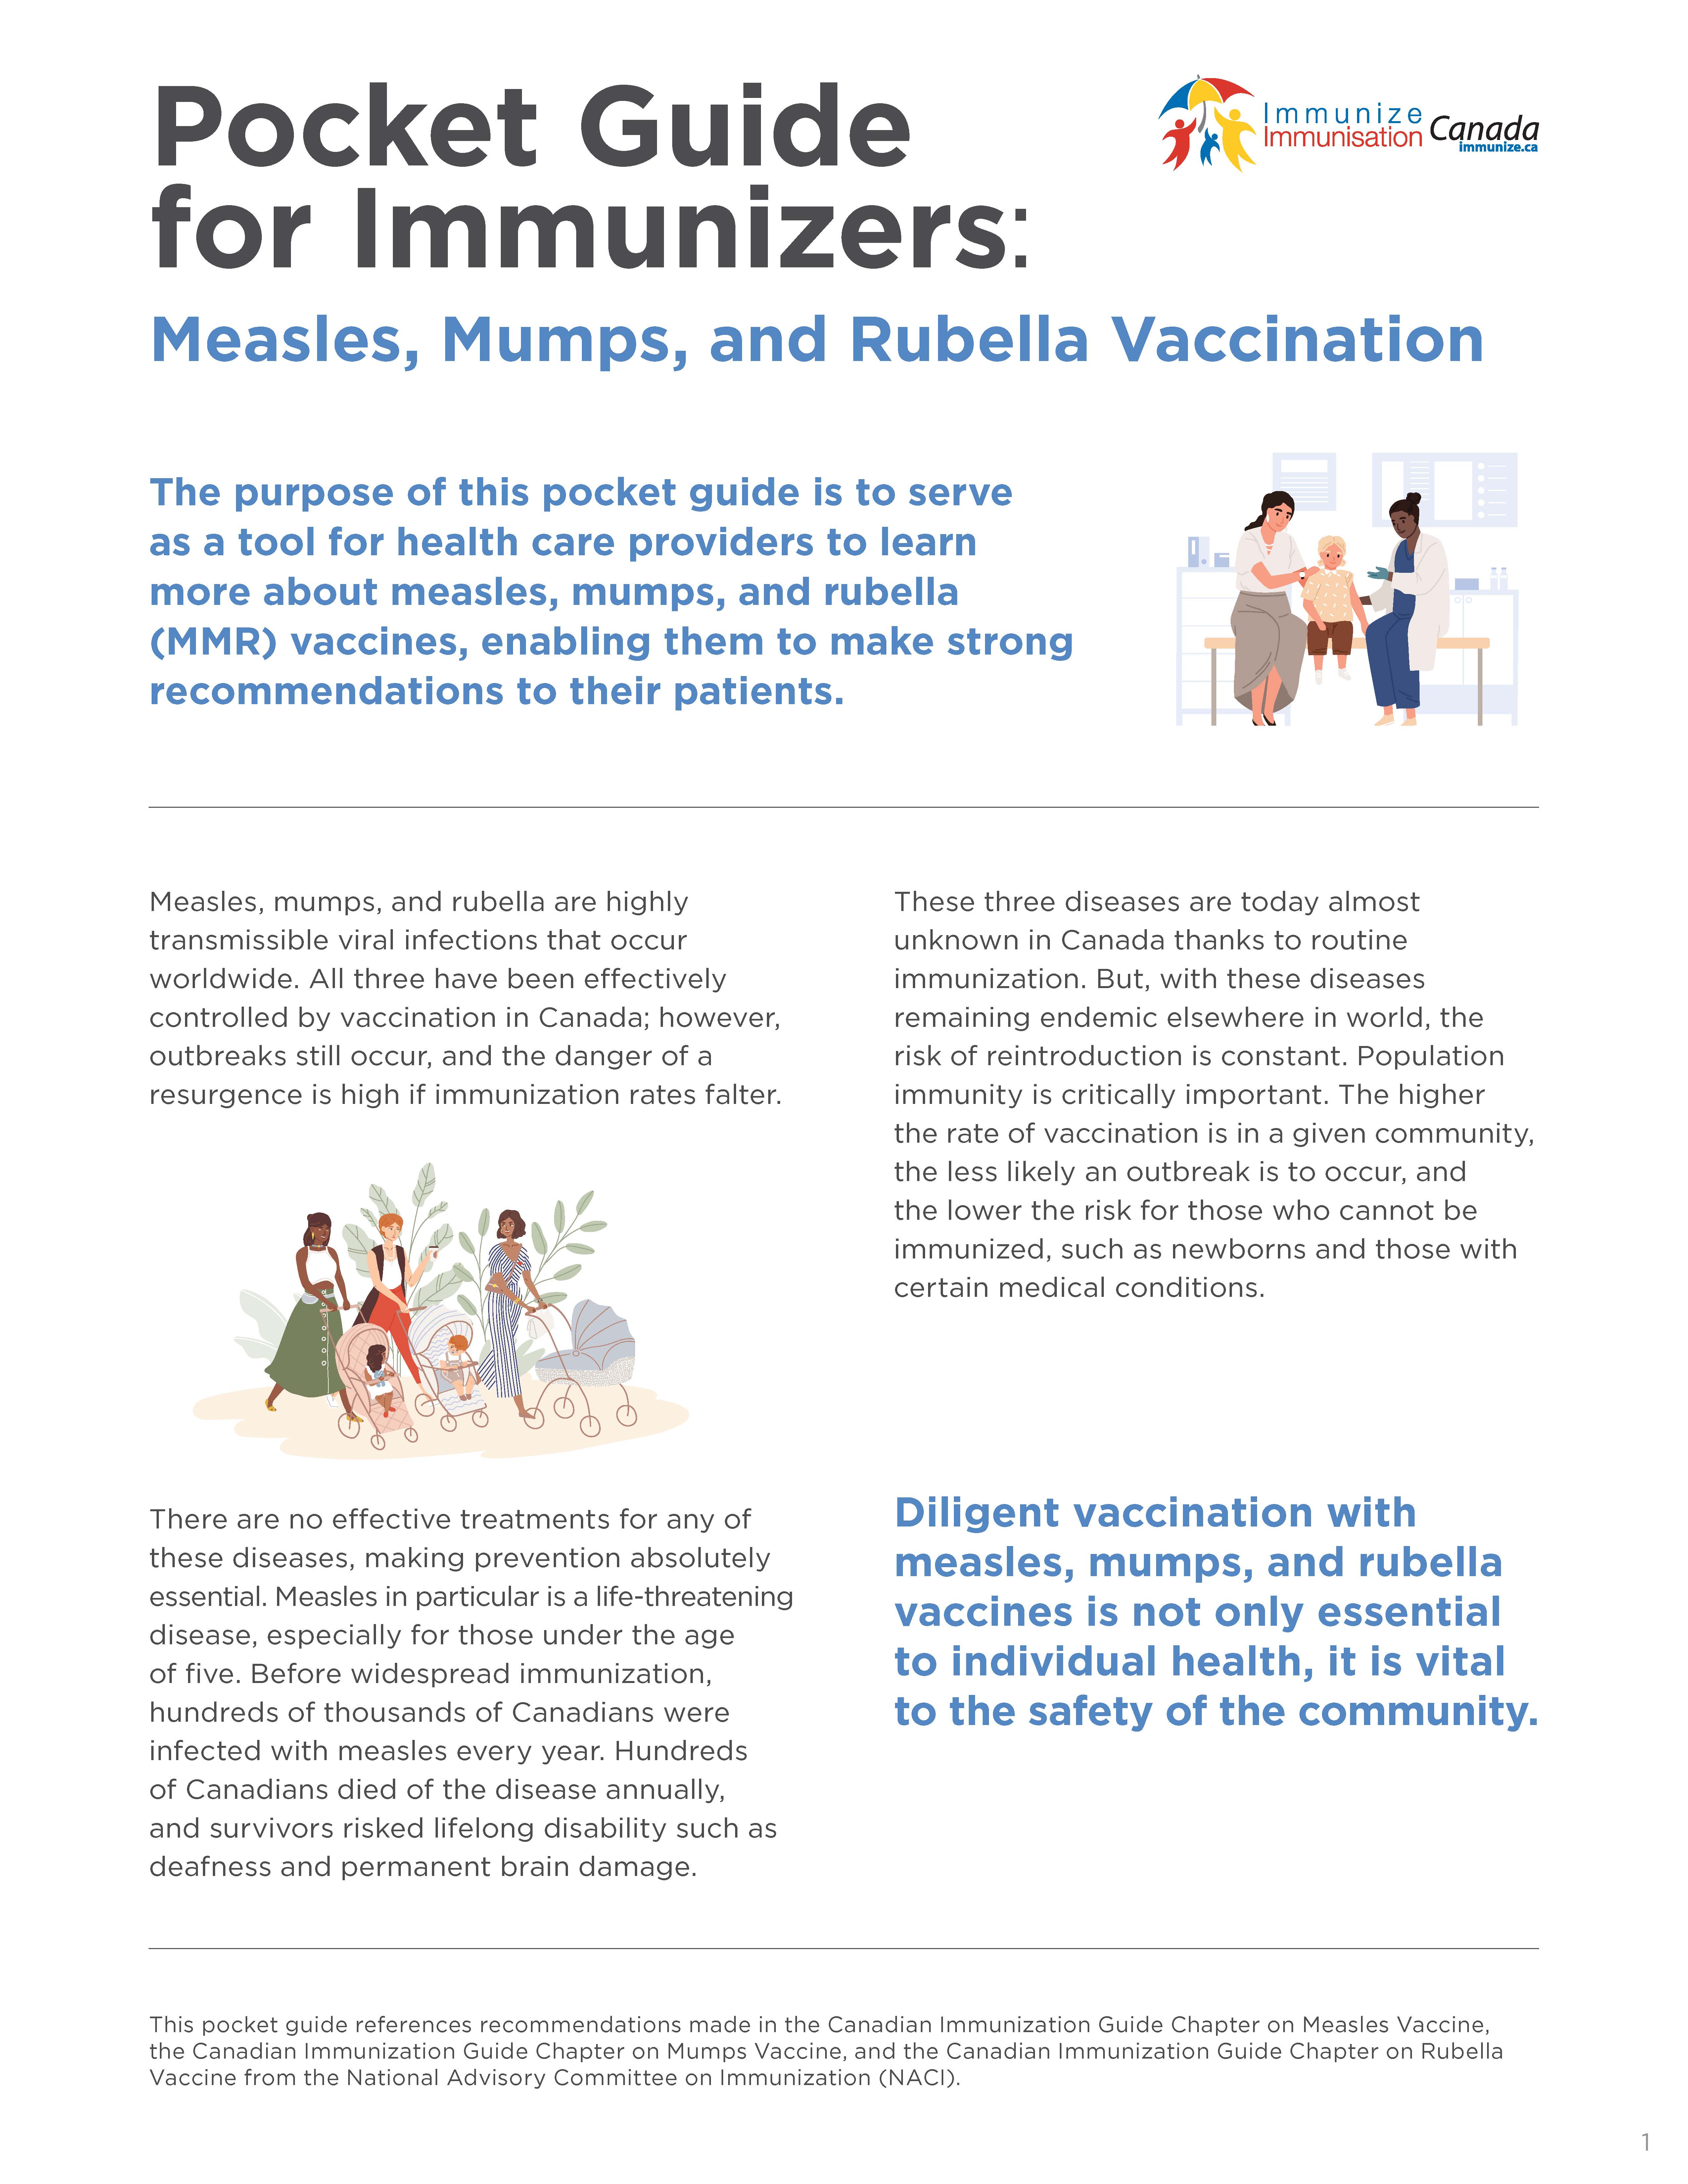 Pocket Guide for Immunizers: Measles, Mumps, and Rubella Vaccination